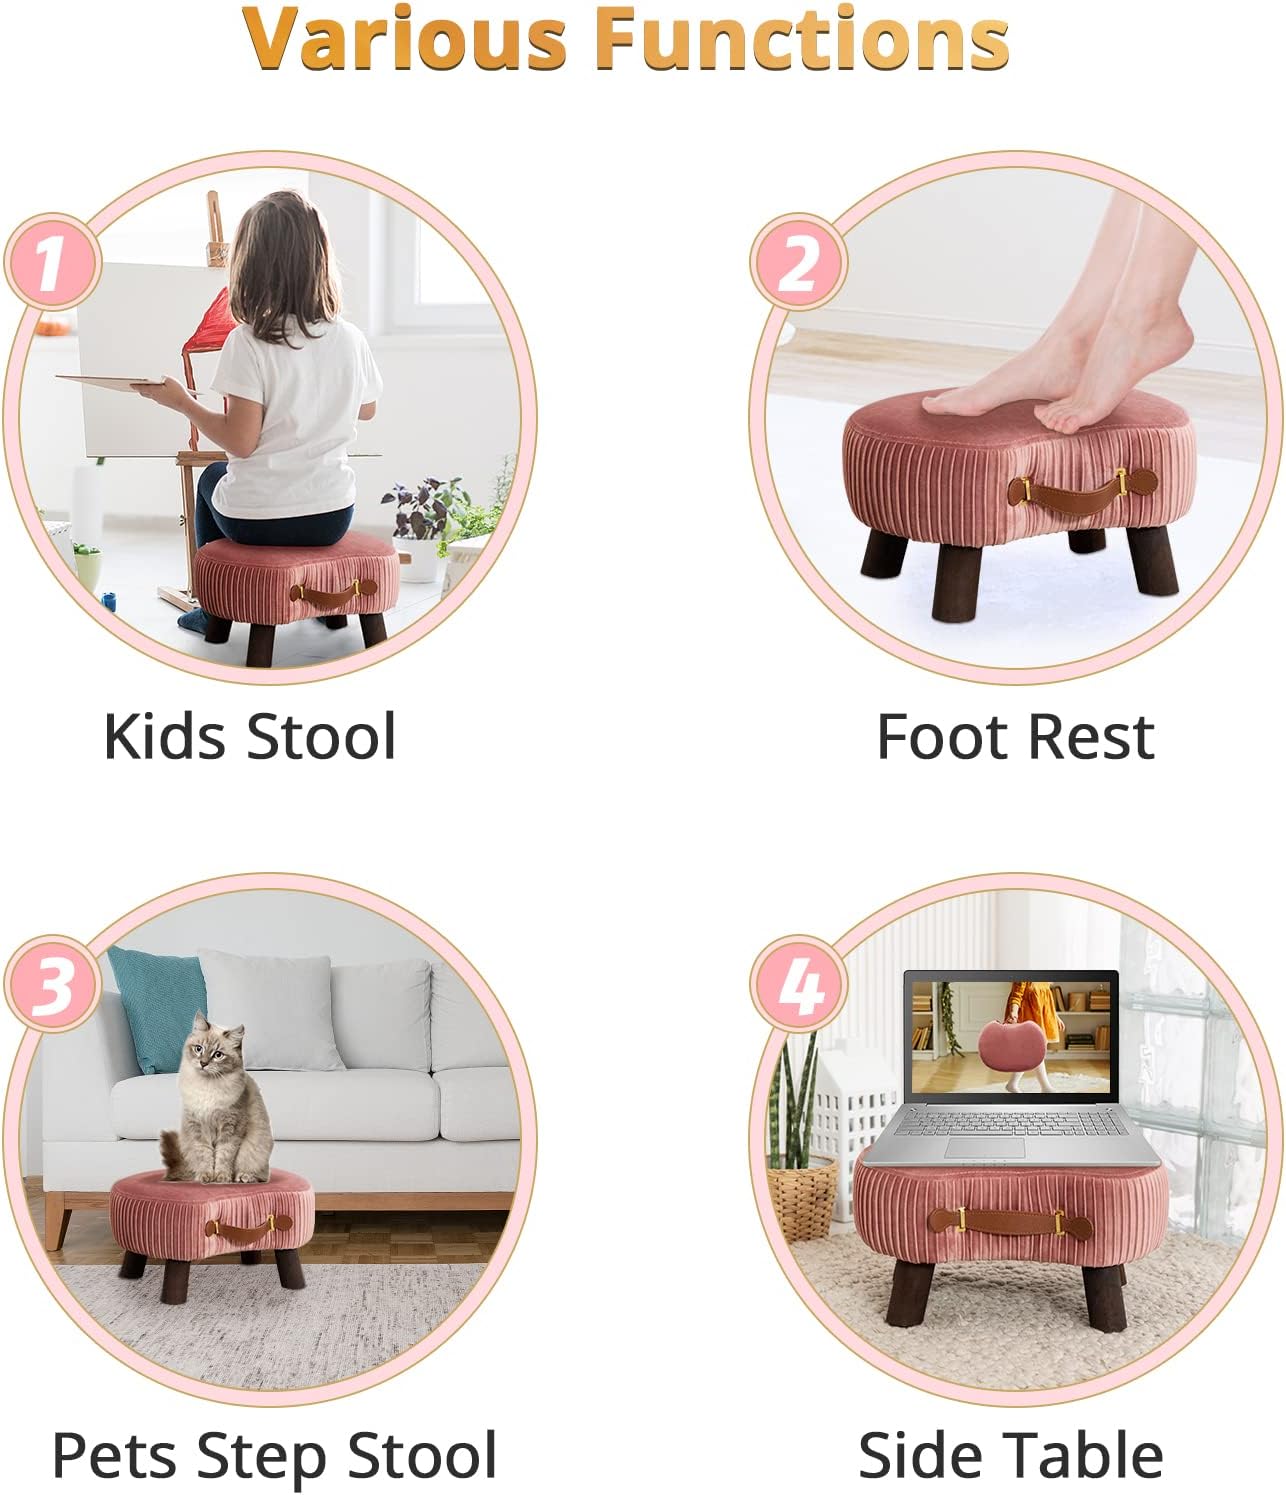 Small Curved Foot Stool with Handle, Pink Velvet Footstool and Ottomans, Modern Foot Rest with Wooden Legs